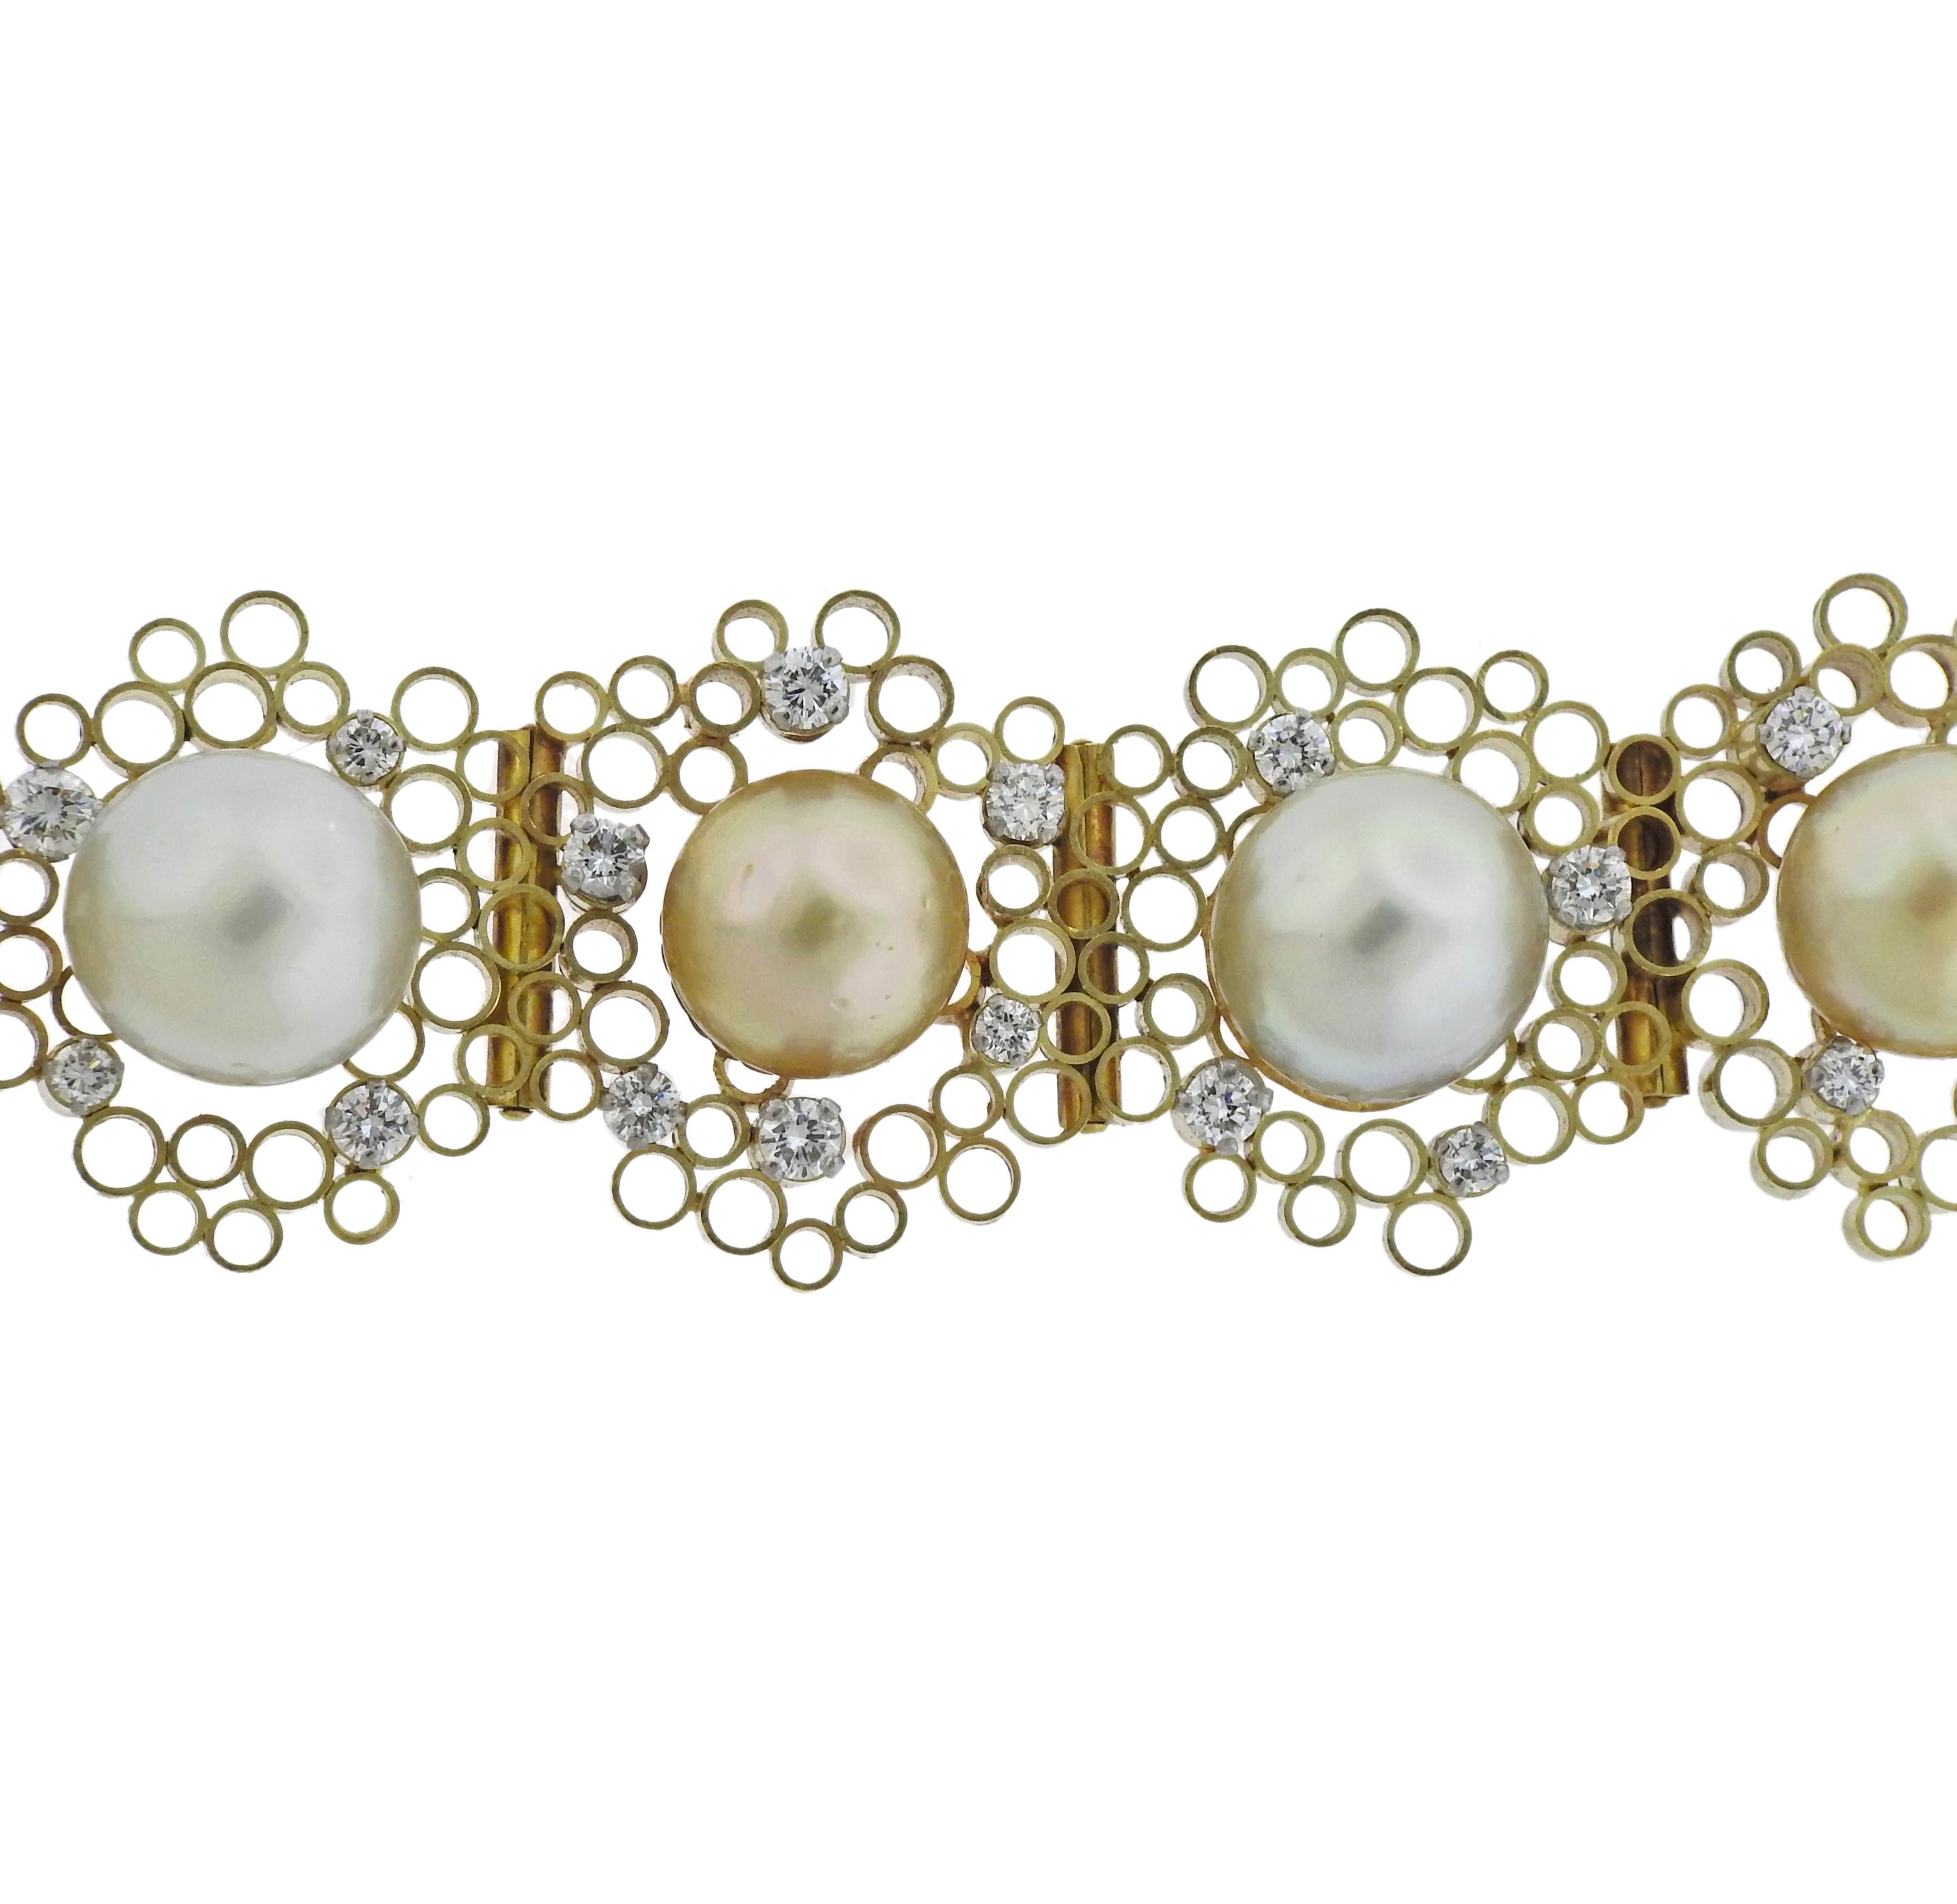 Rare 18k gold Andrew Grima honeycomb bracelet, decorated with approx. 4.50ctw in G/VS diamonds and 12.5mm - 14.1mm pearls. Created in 1974. Bracelet measures 7.25